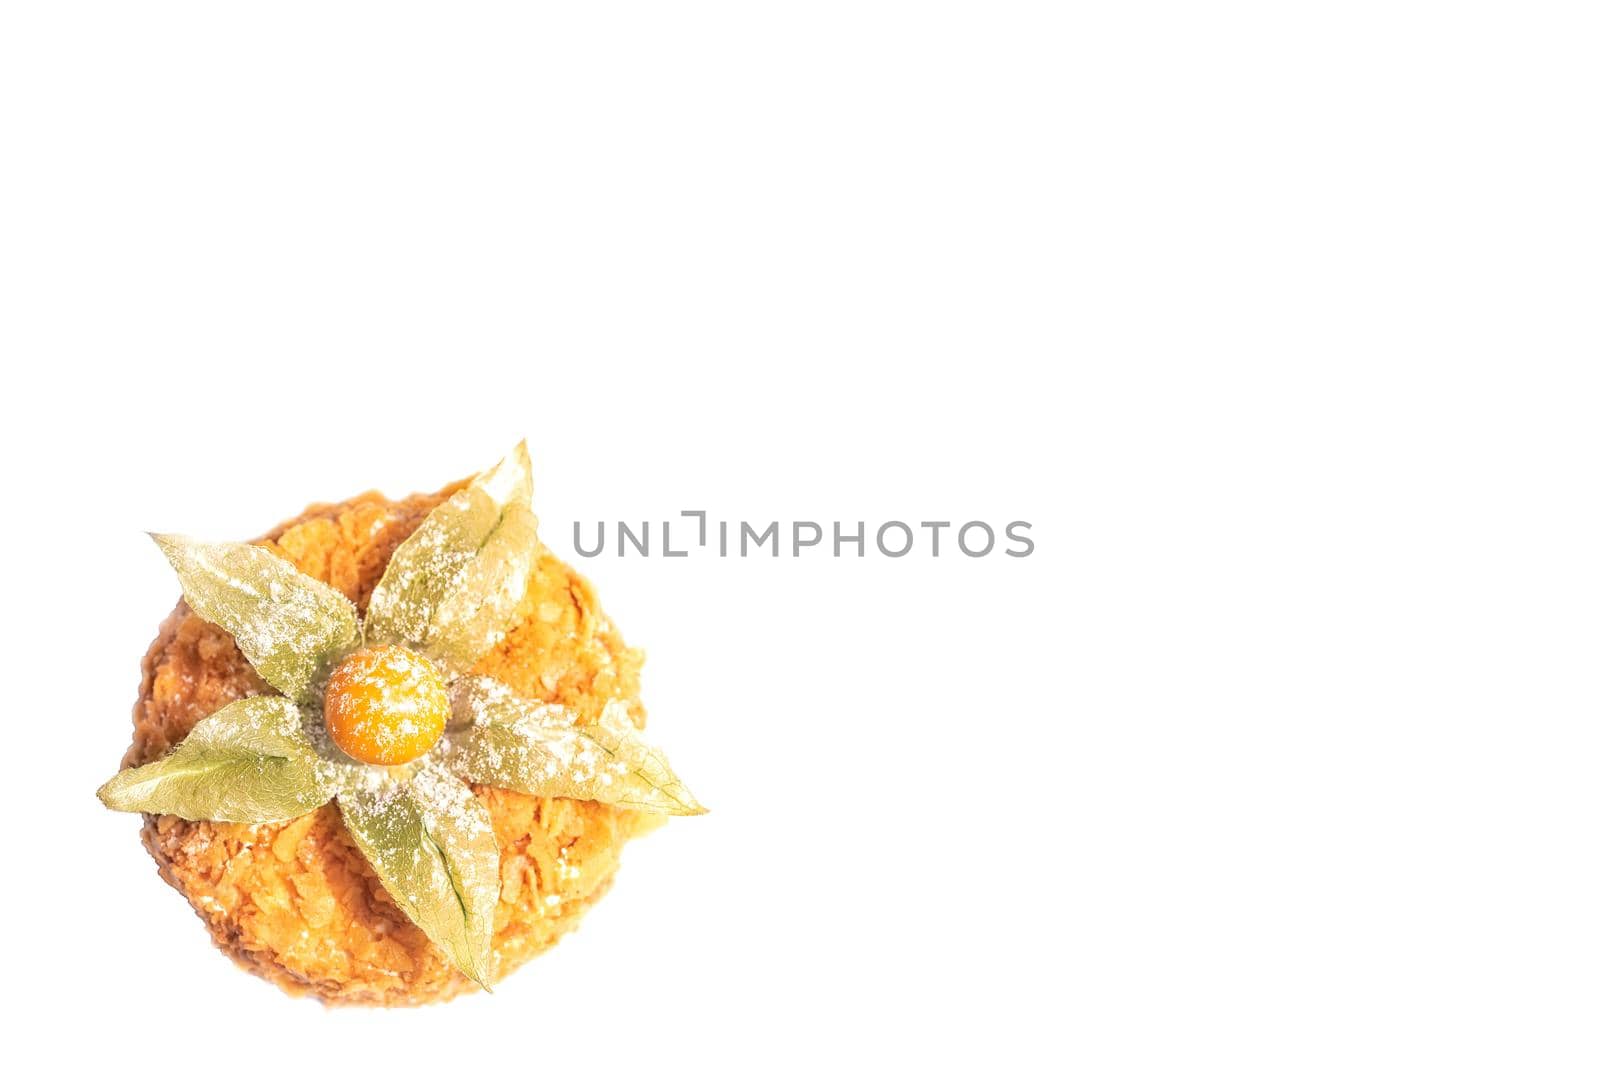 Honey cream cake with fisalis at the top on a white background by Estival